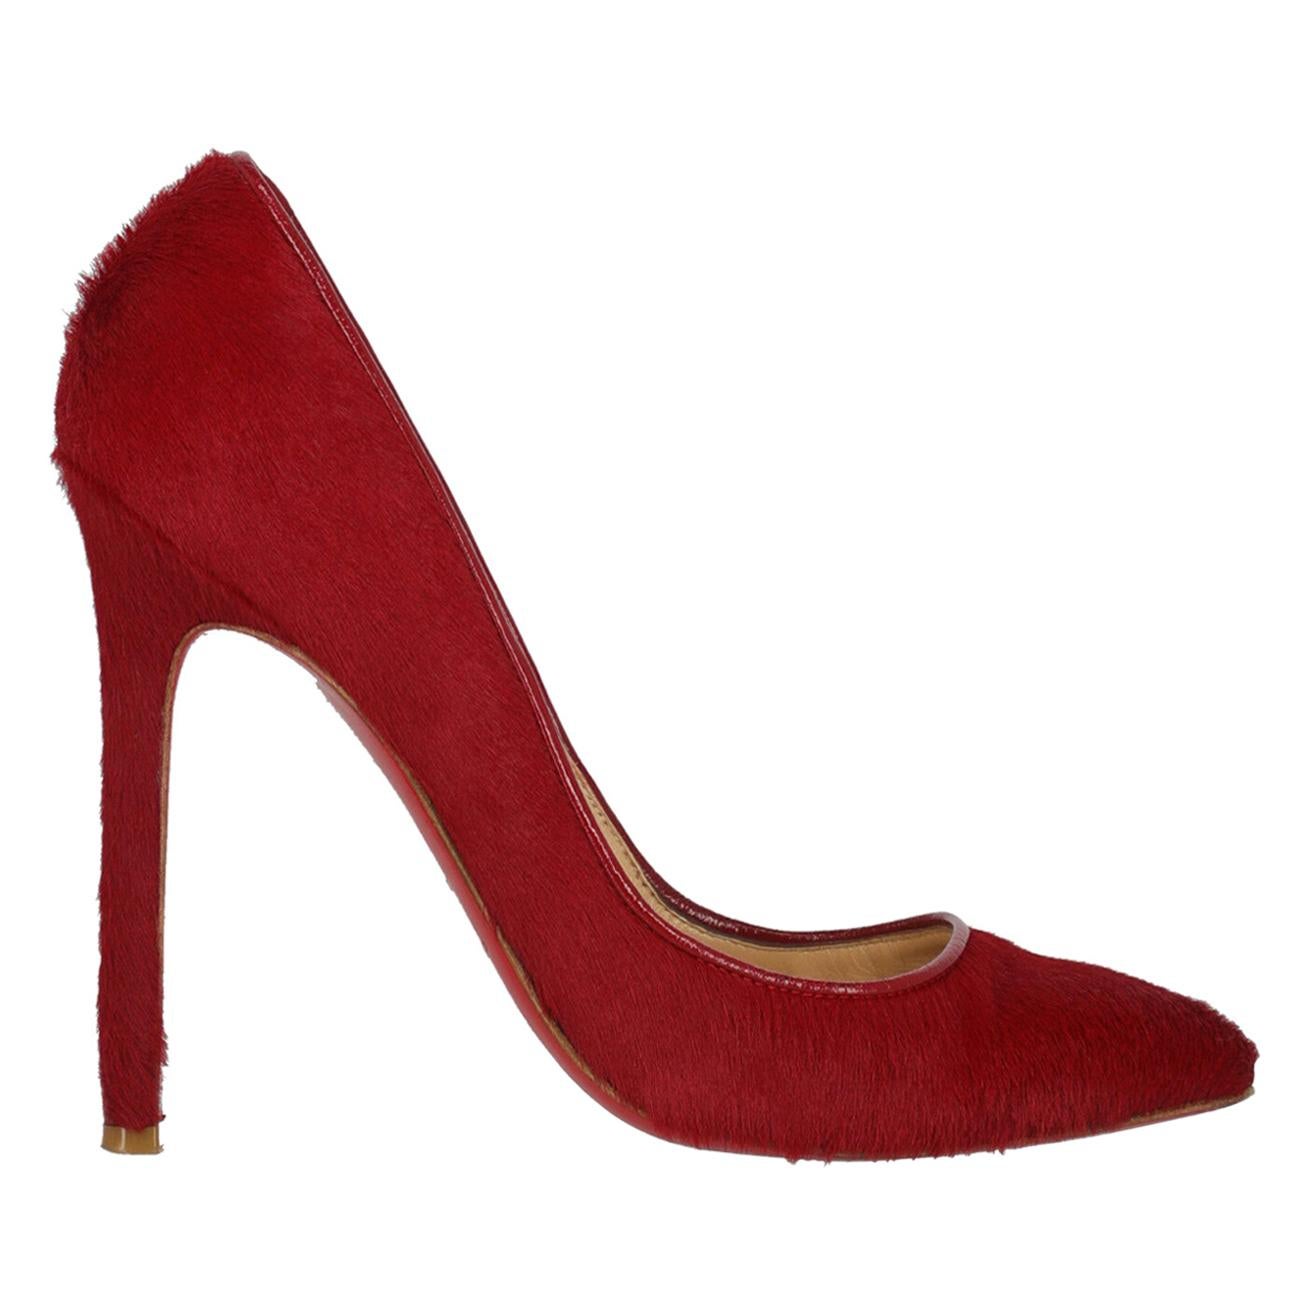 Christian Louboutin Woman Pumps Red Leather IT 35.5